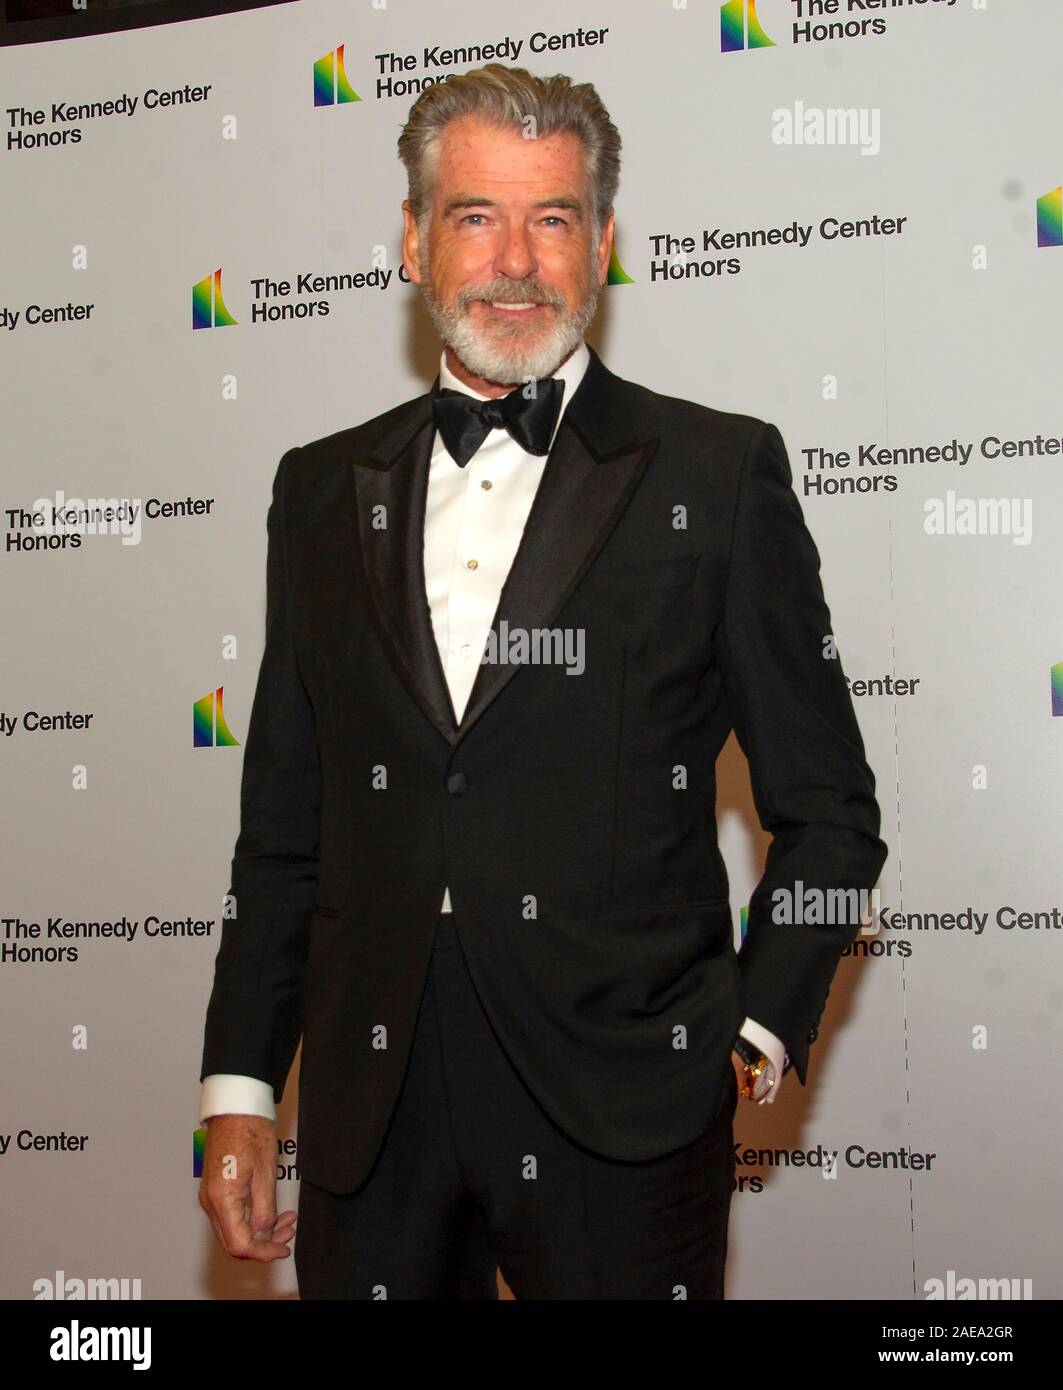 Washington DC, USA. 07th Dec, 2019. Pierce Brosnan arrives for the formal Artist's Dinner honoring the recipients of the 42nd Annual Kennedy Center Honors at the United States Department of State in Washington, DC on Saturday, December 7, 2019. The 2019 honorees are: Earth, Wind & Fire, Sally Field, Linda Ronstadt, Sesame Street, and Michael Tilson Thomas.Credit: Ron Sachs/Pool via CNP | usage worldwide Credit: dpa/Alamy Live News Stock Photo